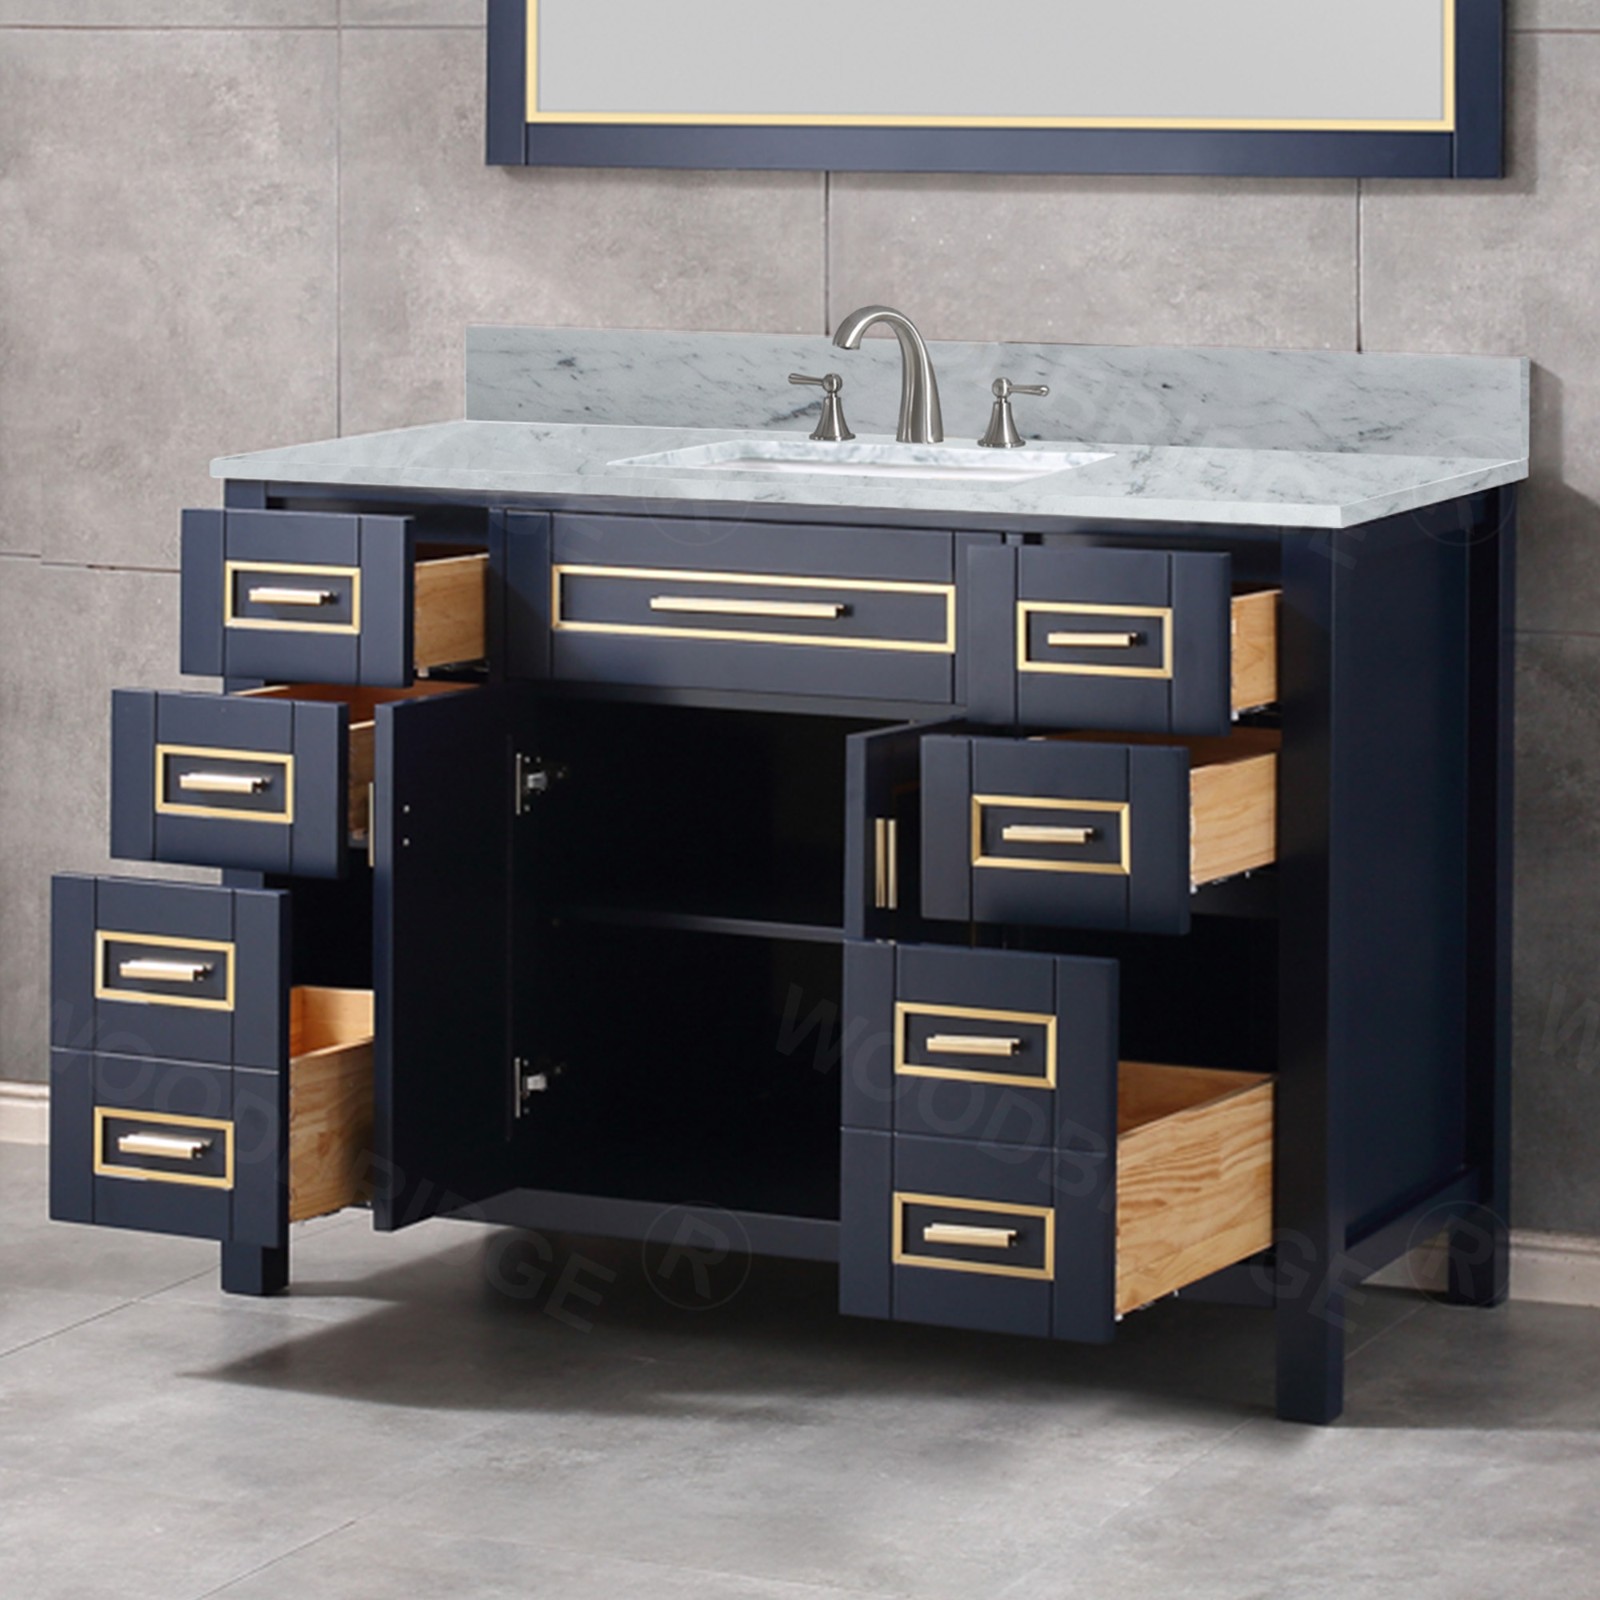  WOODBRIDGE Milan  49” Floor Mounted Single Basin Vanity Set with Solid Wood Cabinet in Navy Blue, and Carrara White Marble Vanity Top with Pre-installed Undermount Rectangle Bathroom Sink in White, Pre-Drilled 3-Hole for 8-inch Widespread Faucet_4734